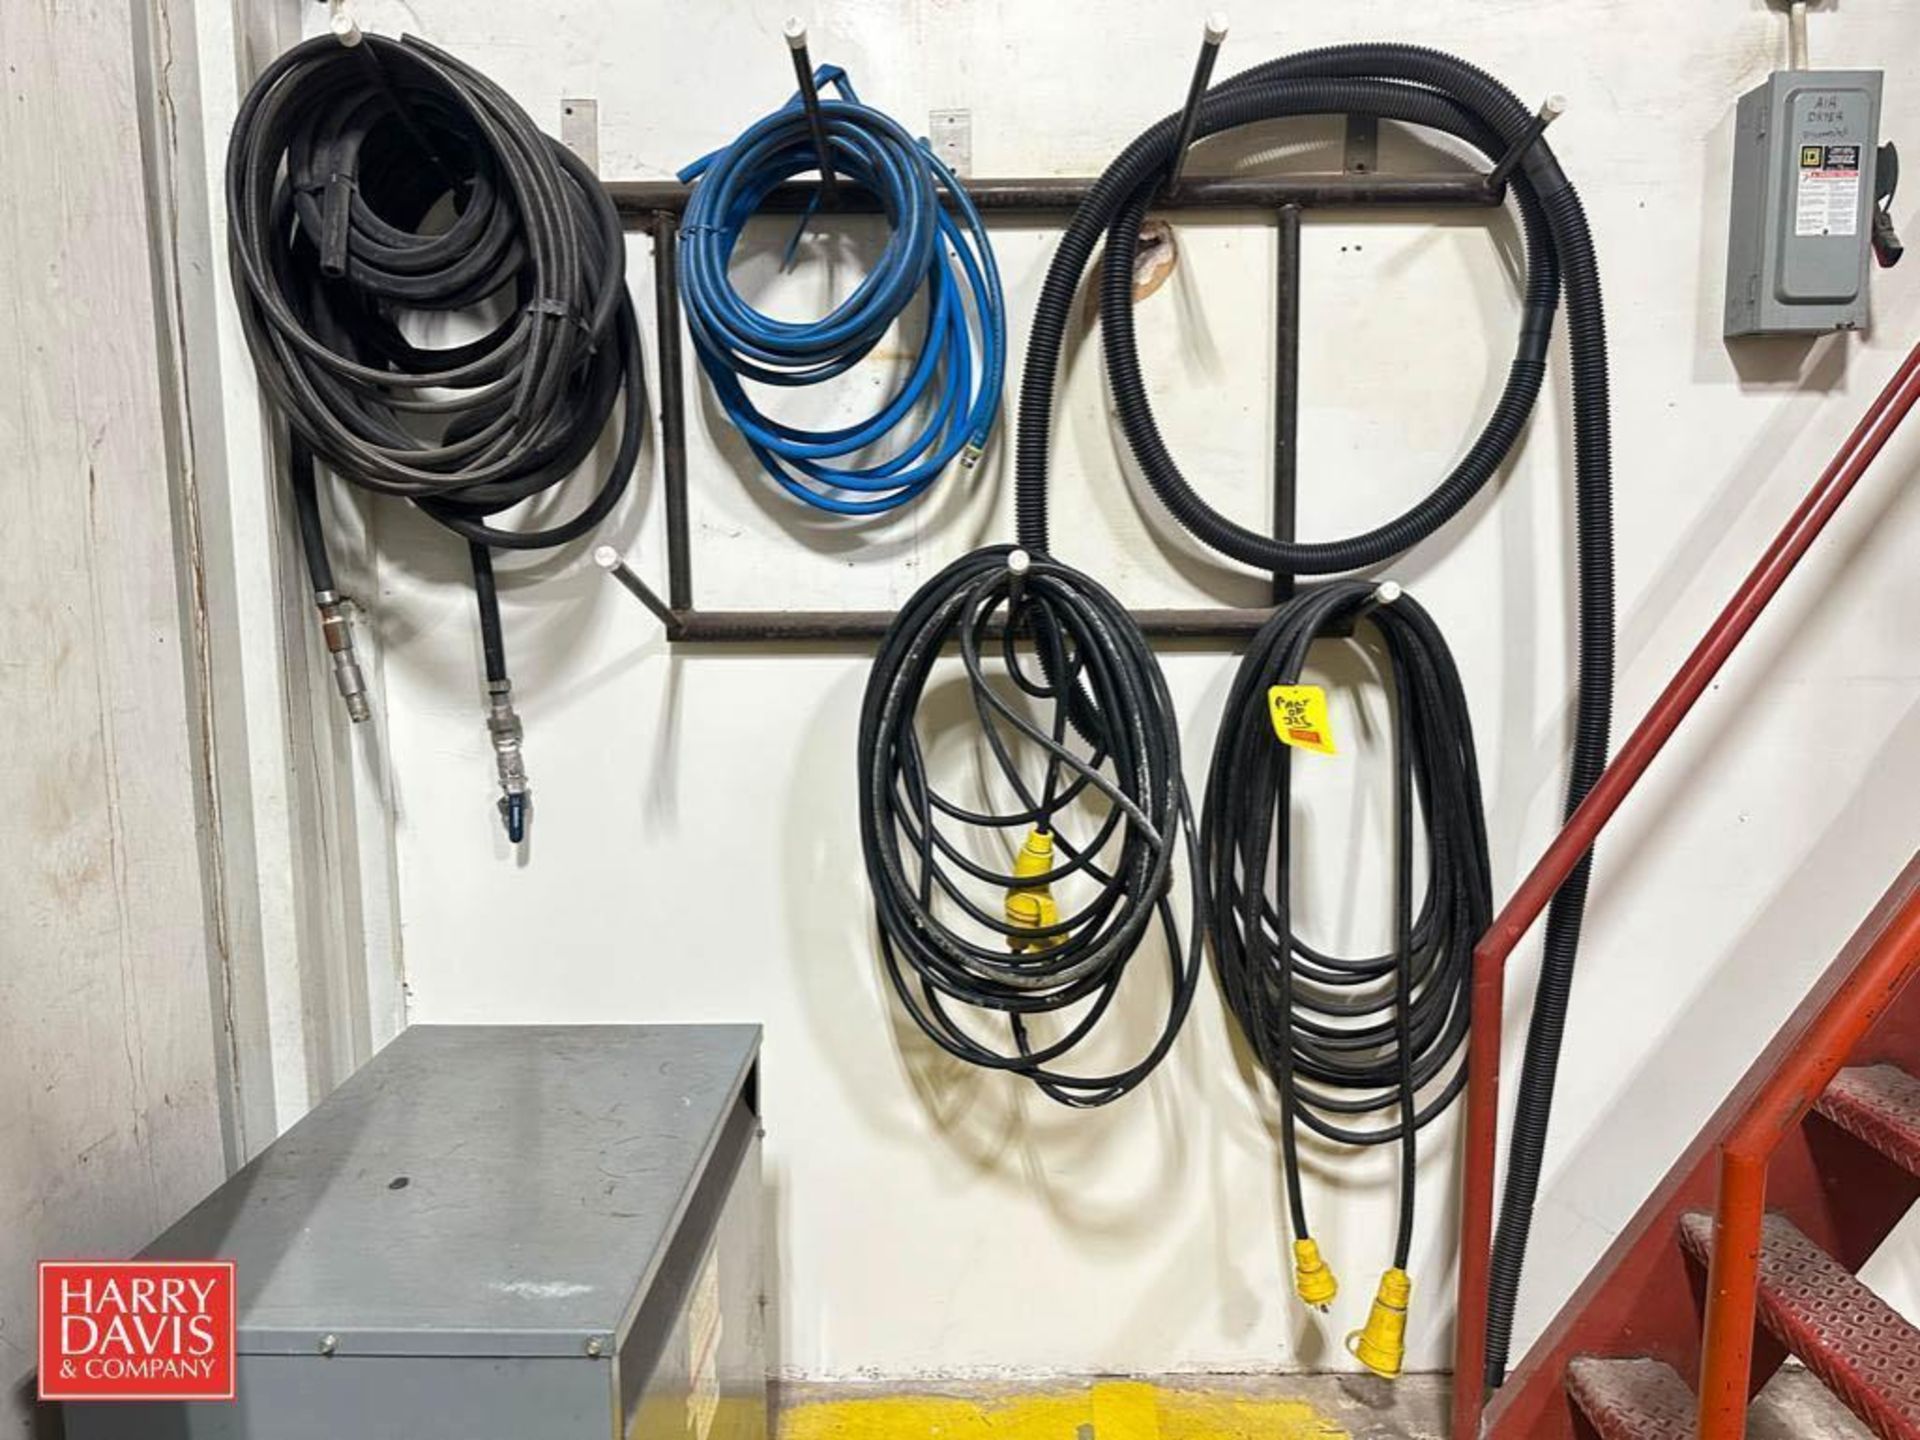 Sullair and other Air Filters, Extension Cords and Air Hoses - Rigging Fee: $50 - Image 2 of 2